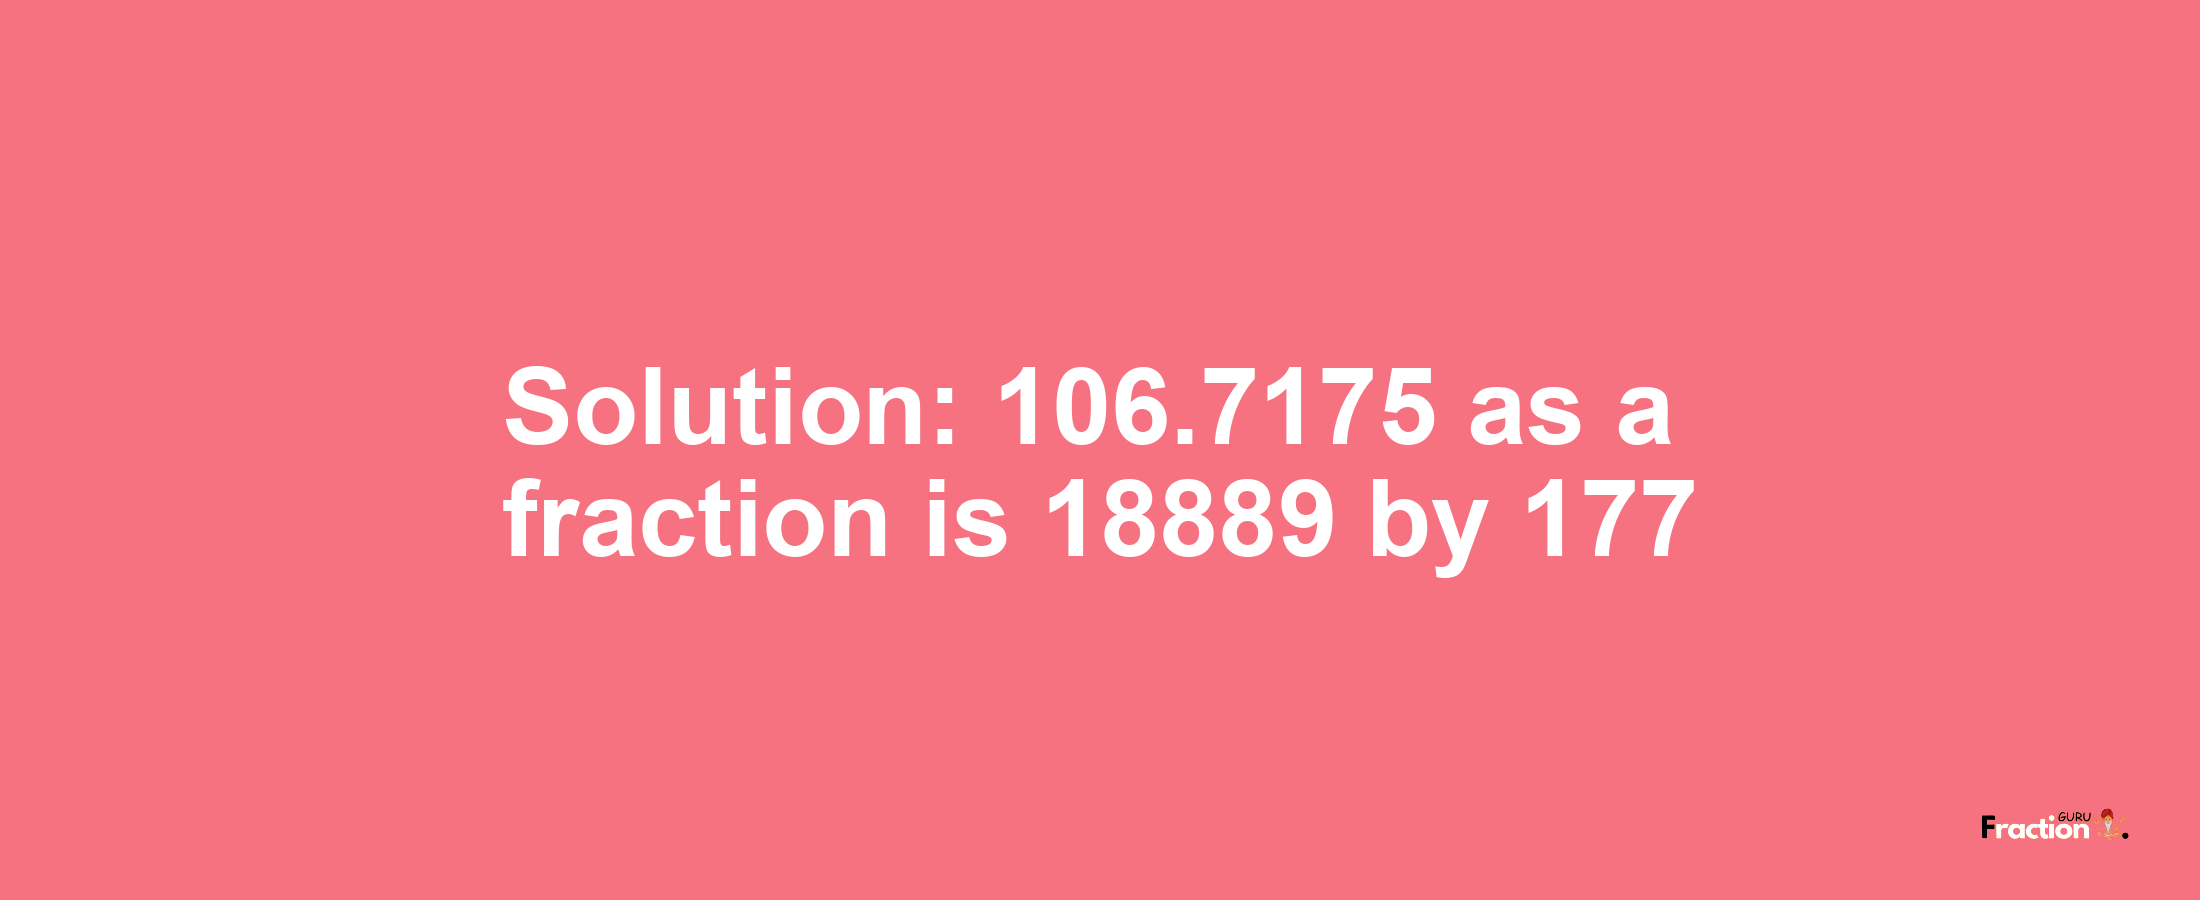 Solution:106.7175 as a fraction is 18889/177